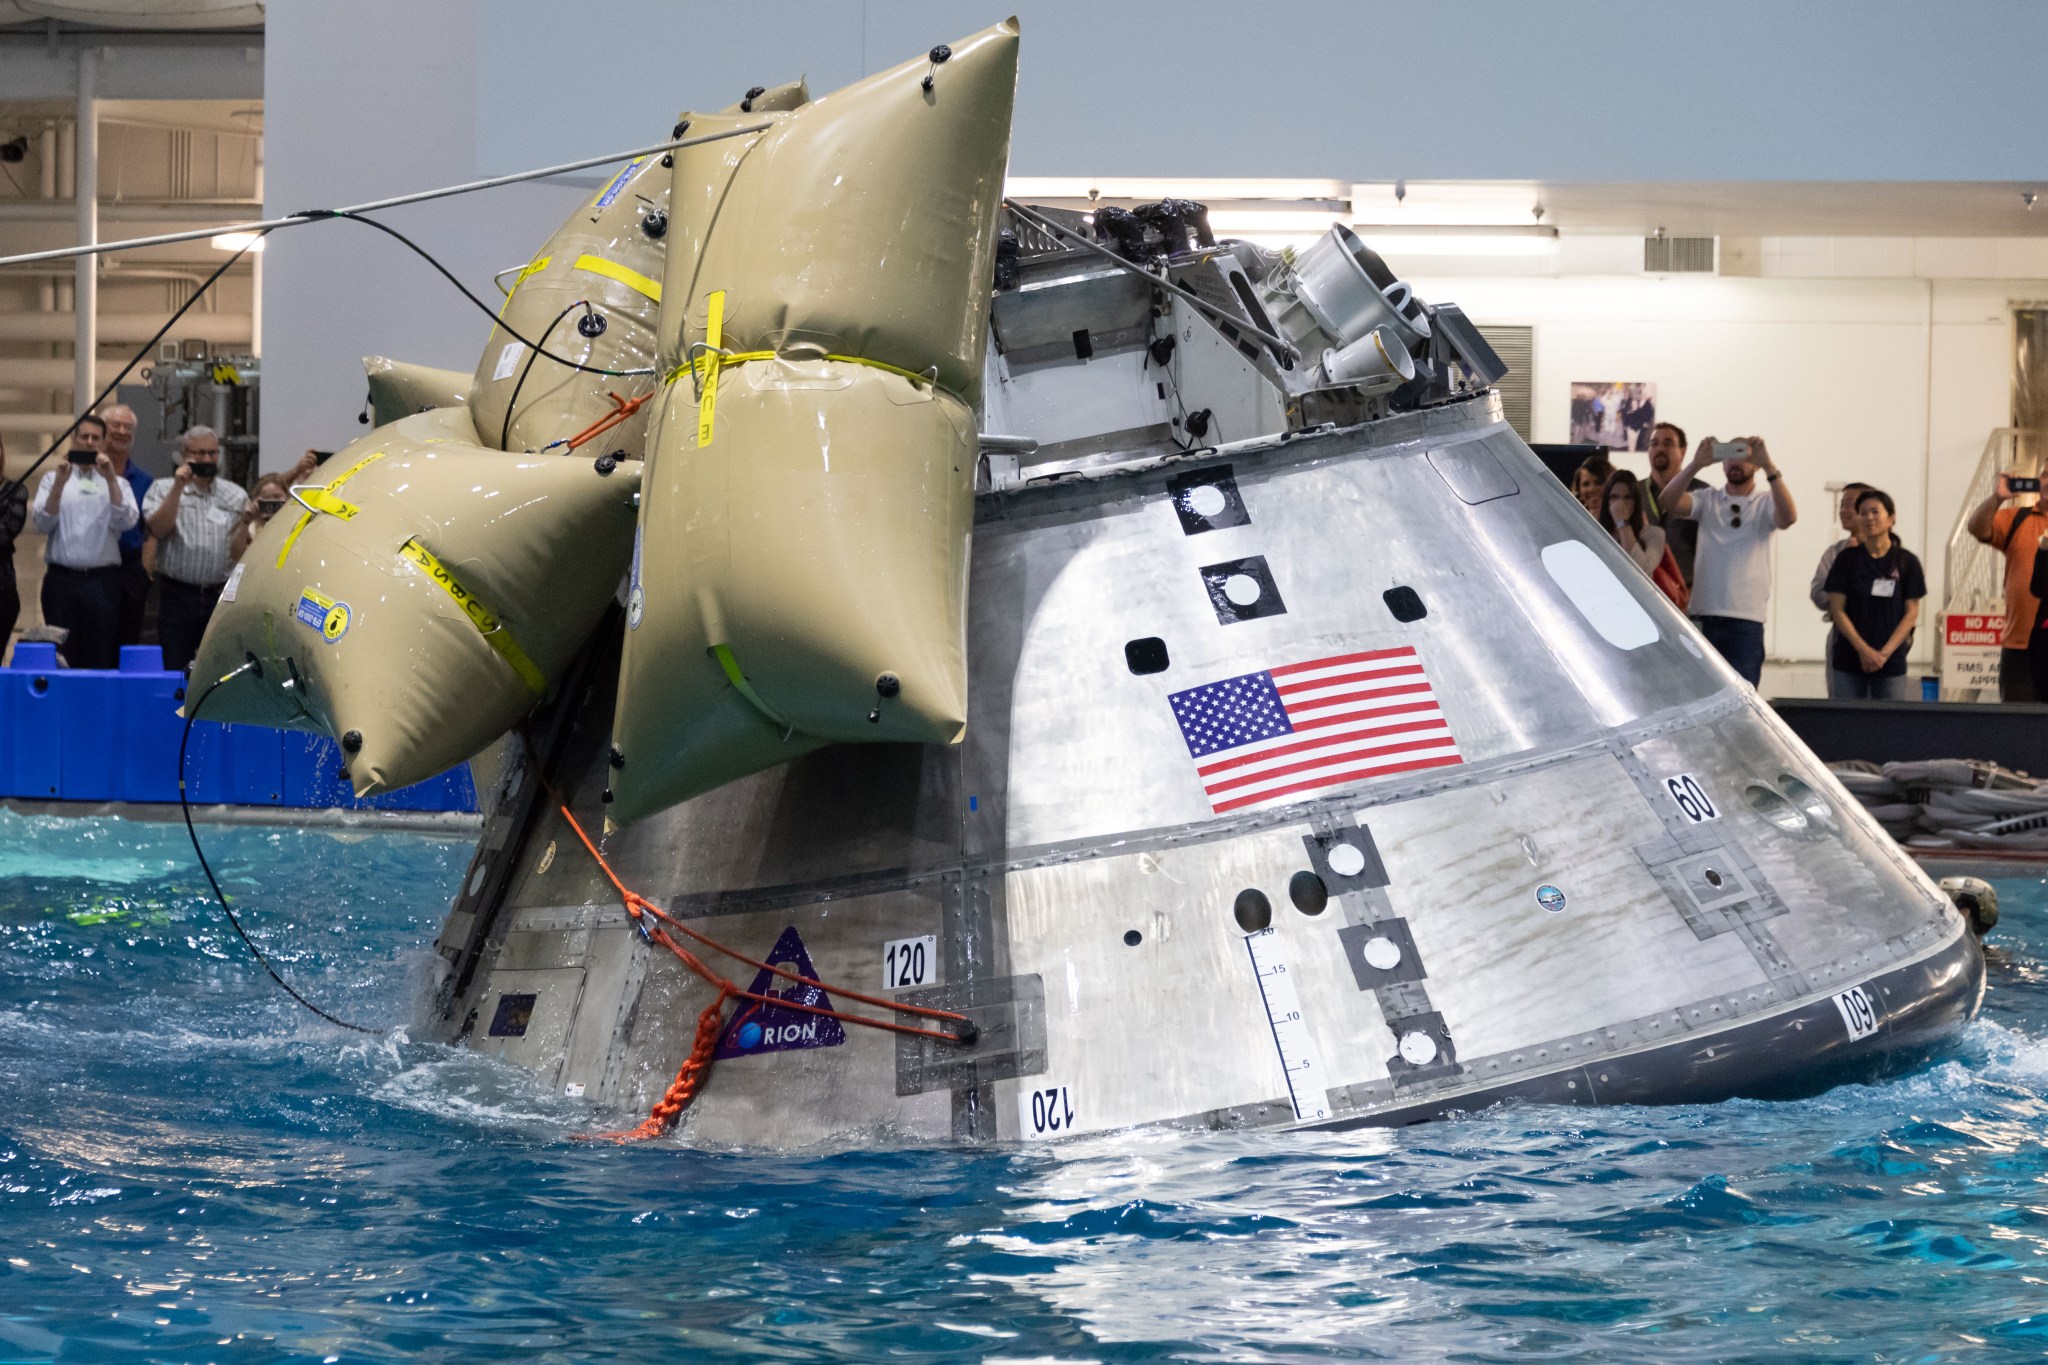 SpaceX Crew 3's Water Survival Training